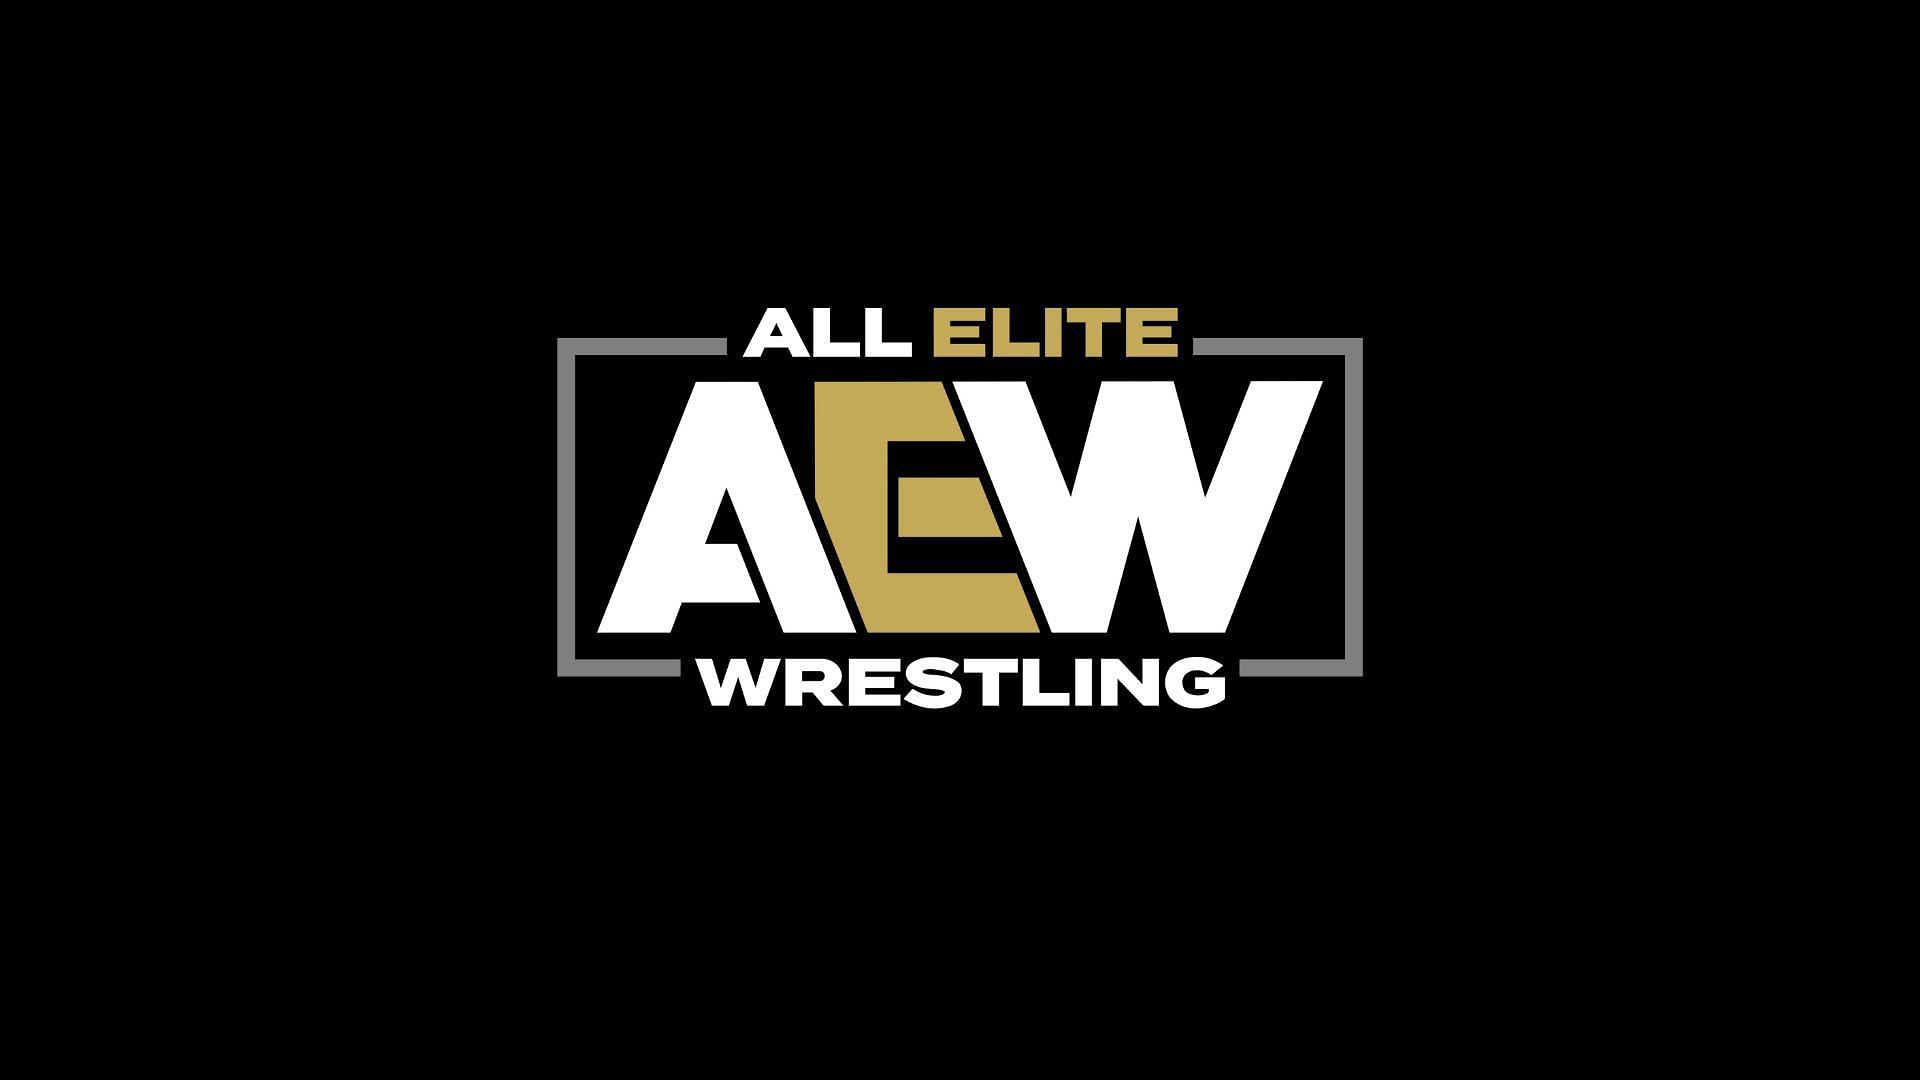 WCW veteran teases joining AEW in a backstage role